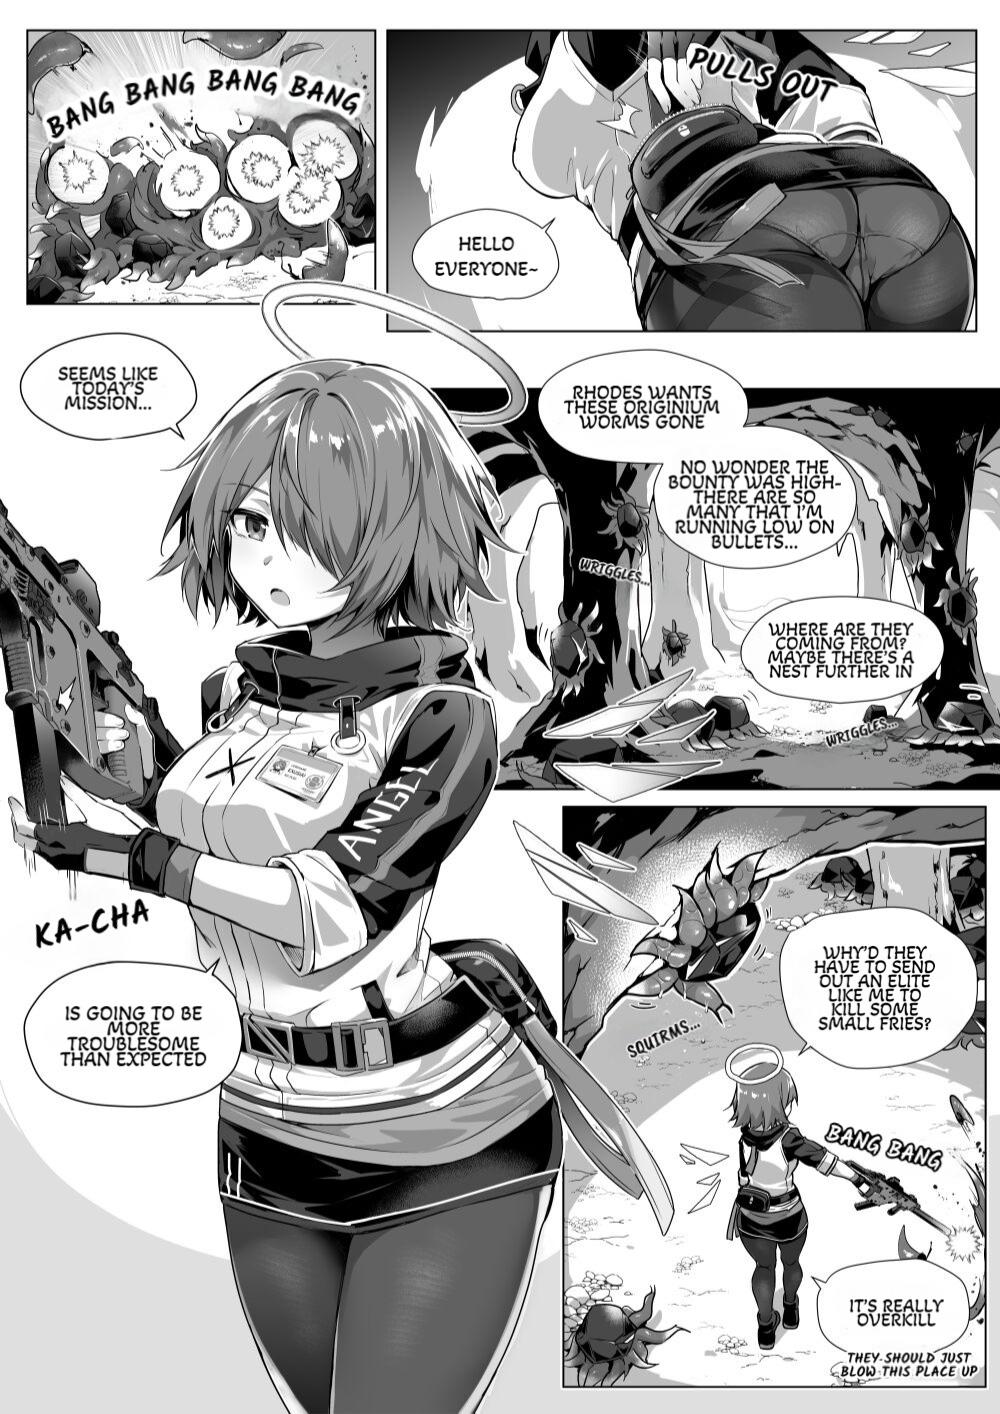 Chubby My Stomach is not a Breeding Ground for Bugs - Arknights Prostitute - Page 3